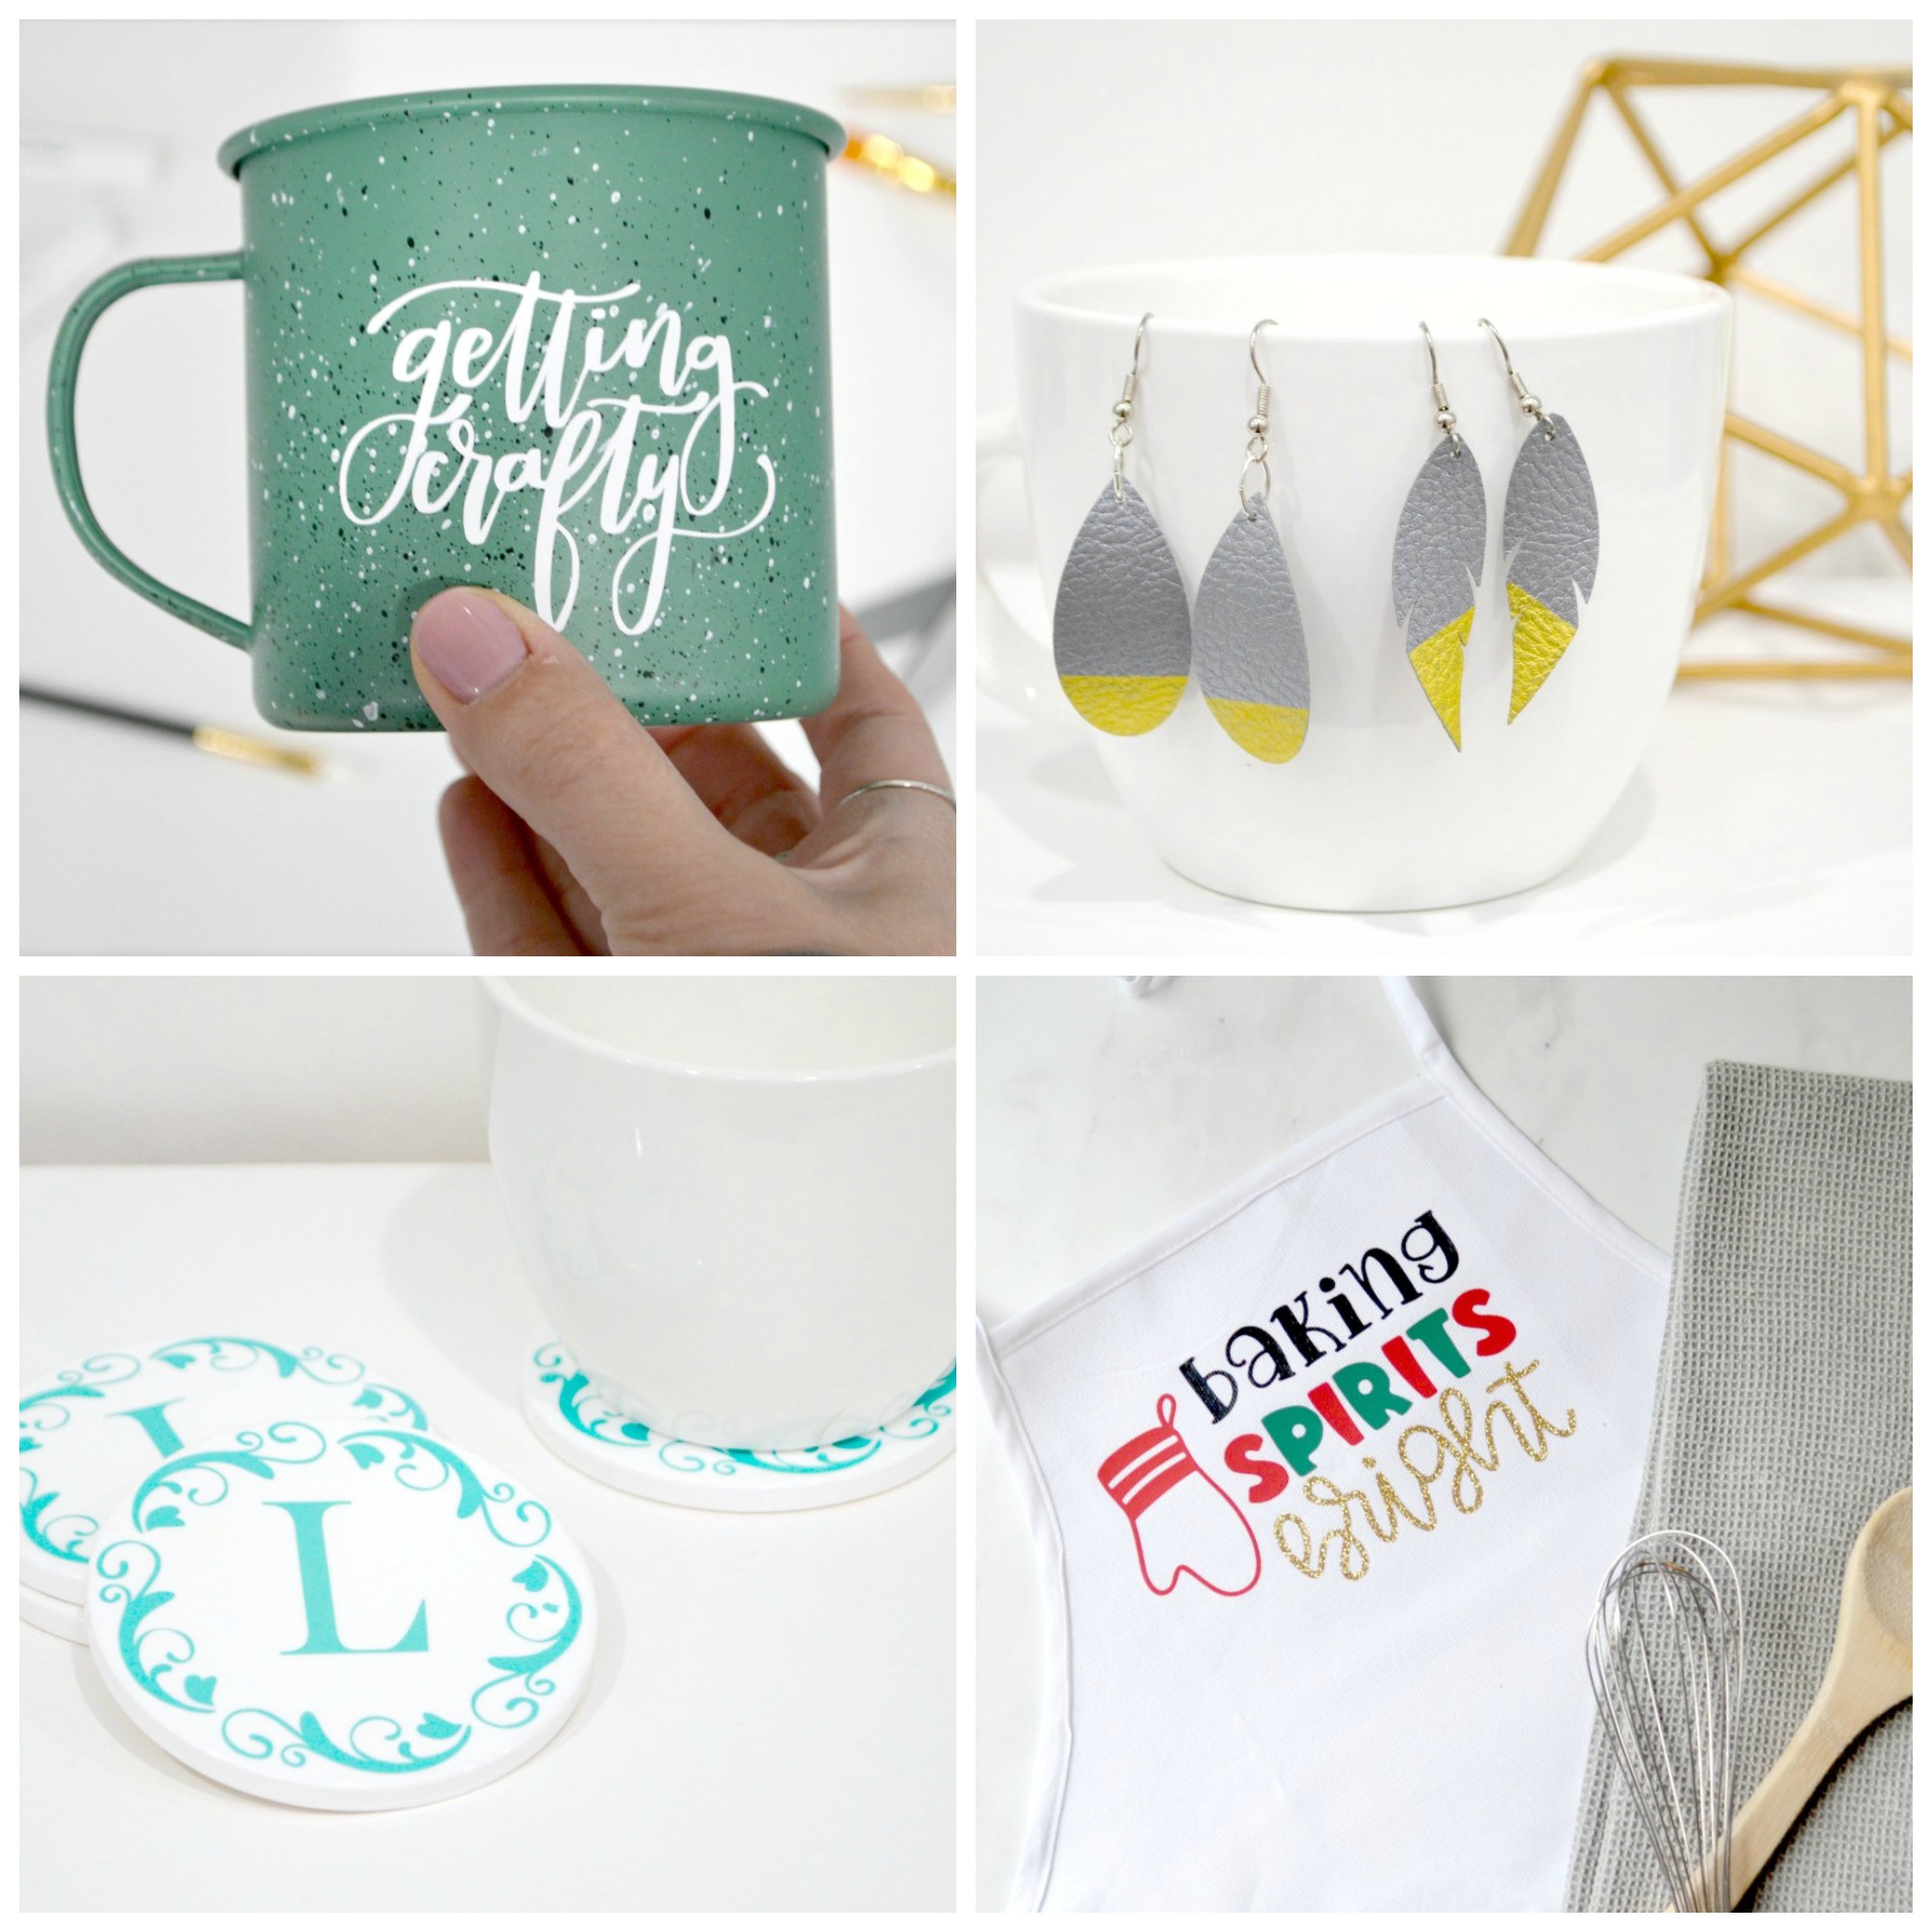 5 Things I Love About My Cricut Explore Air 2 - Amy Latta Creations